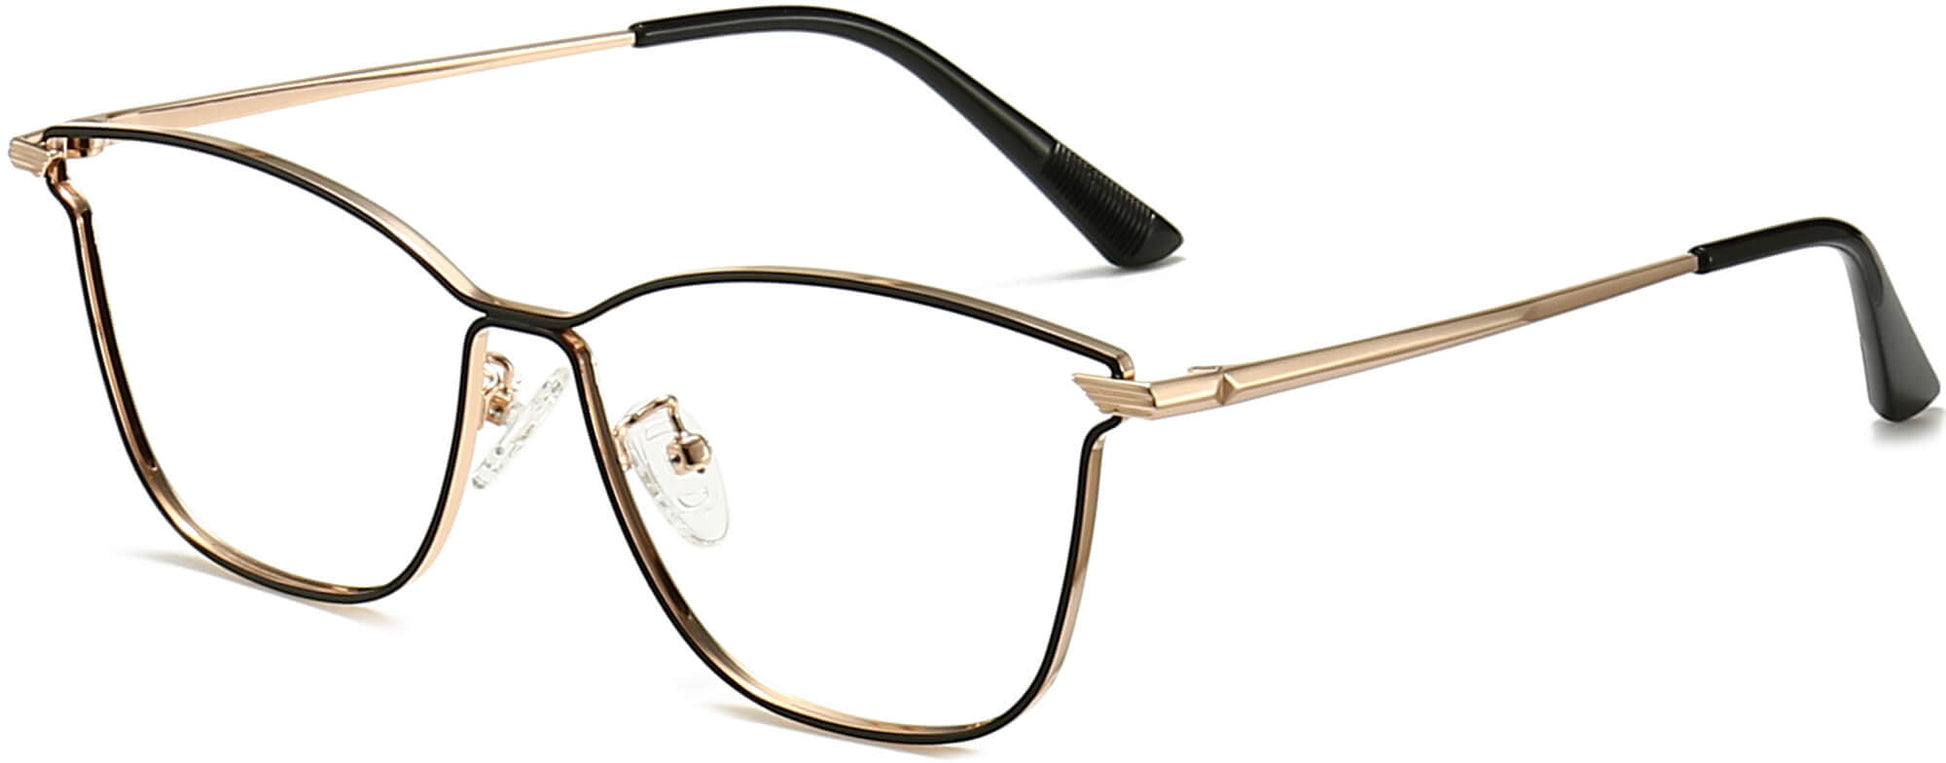 Chelsea Cateye Black Eyeglasses from ANRRI, angle view